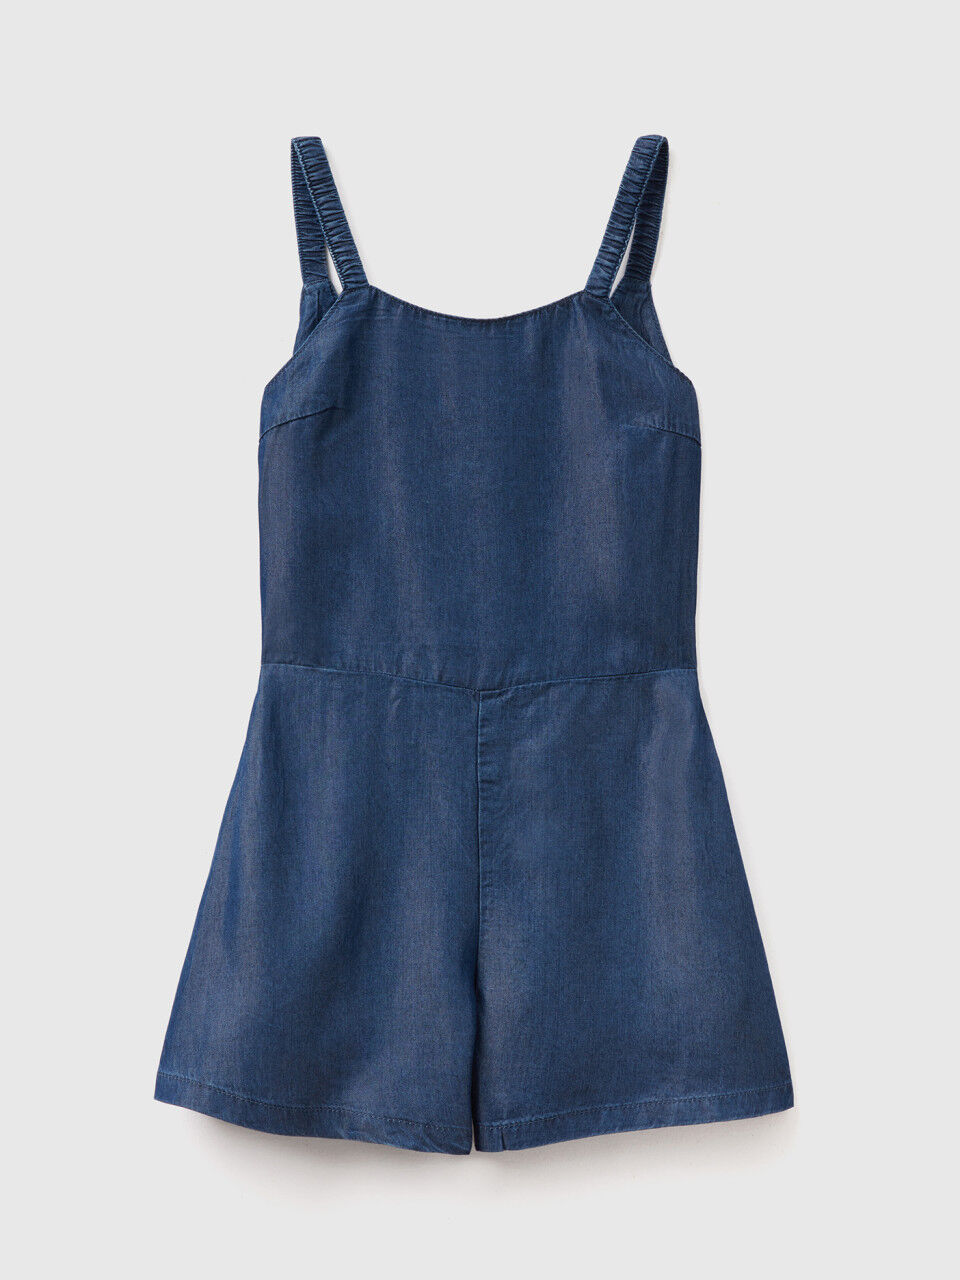 Denim Overalls Are a Summer Staple, and I'm Buying This Amazon Style